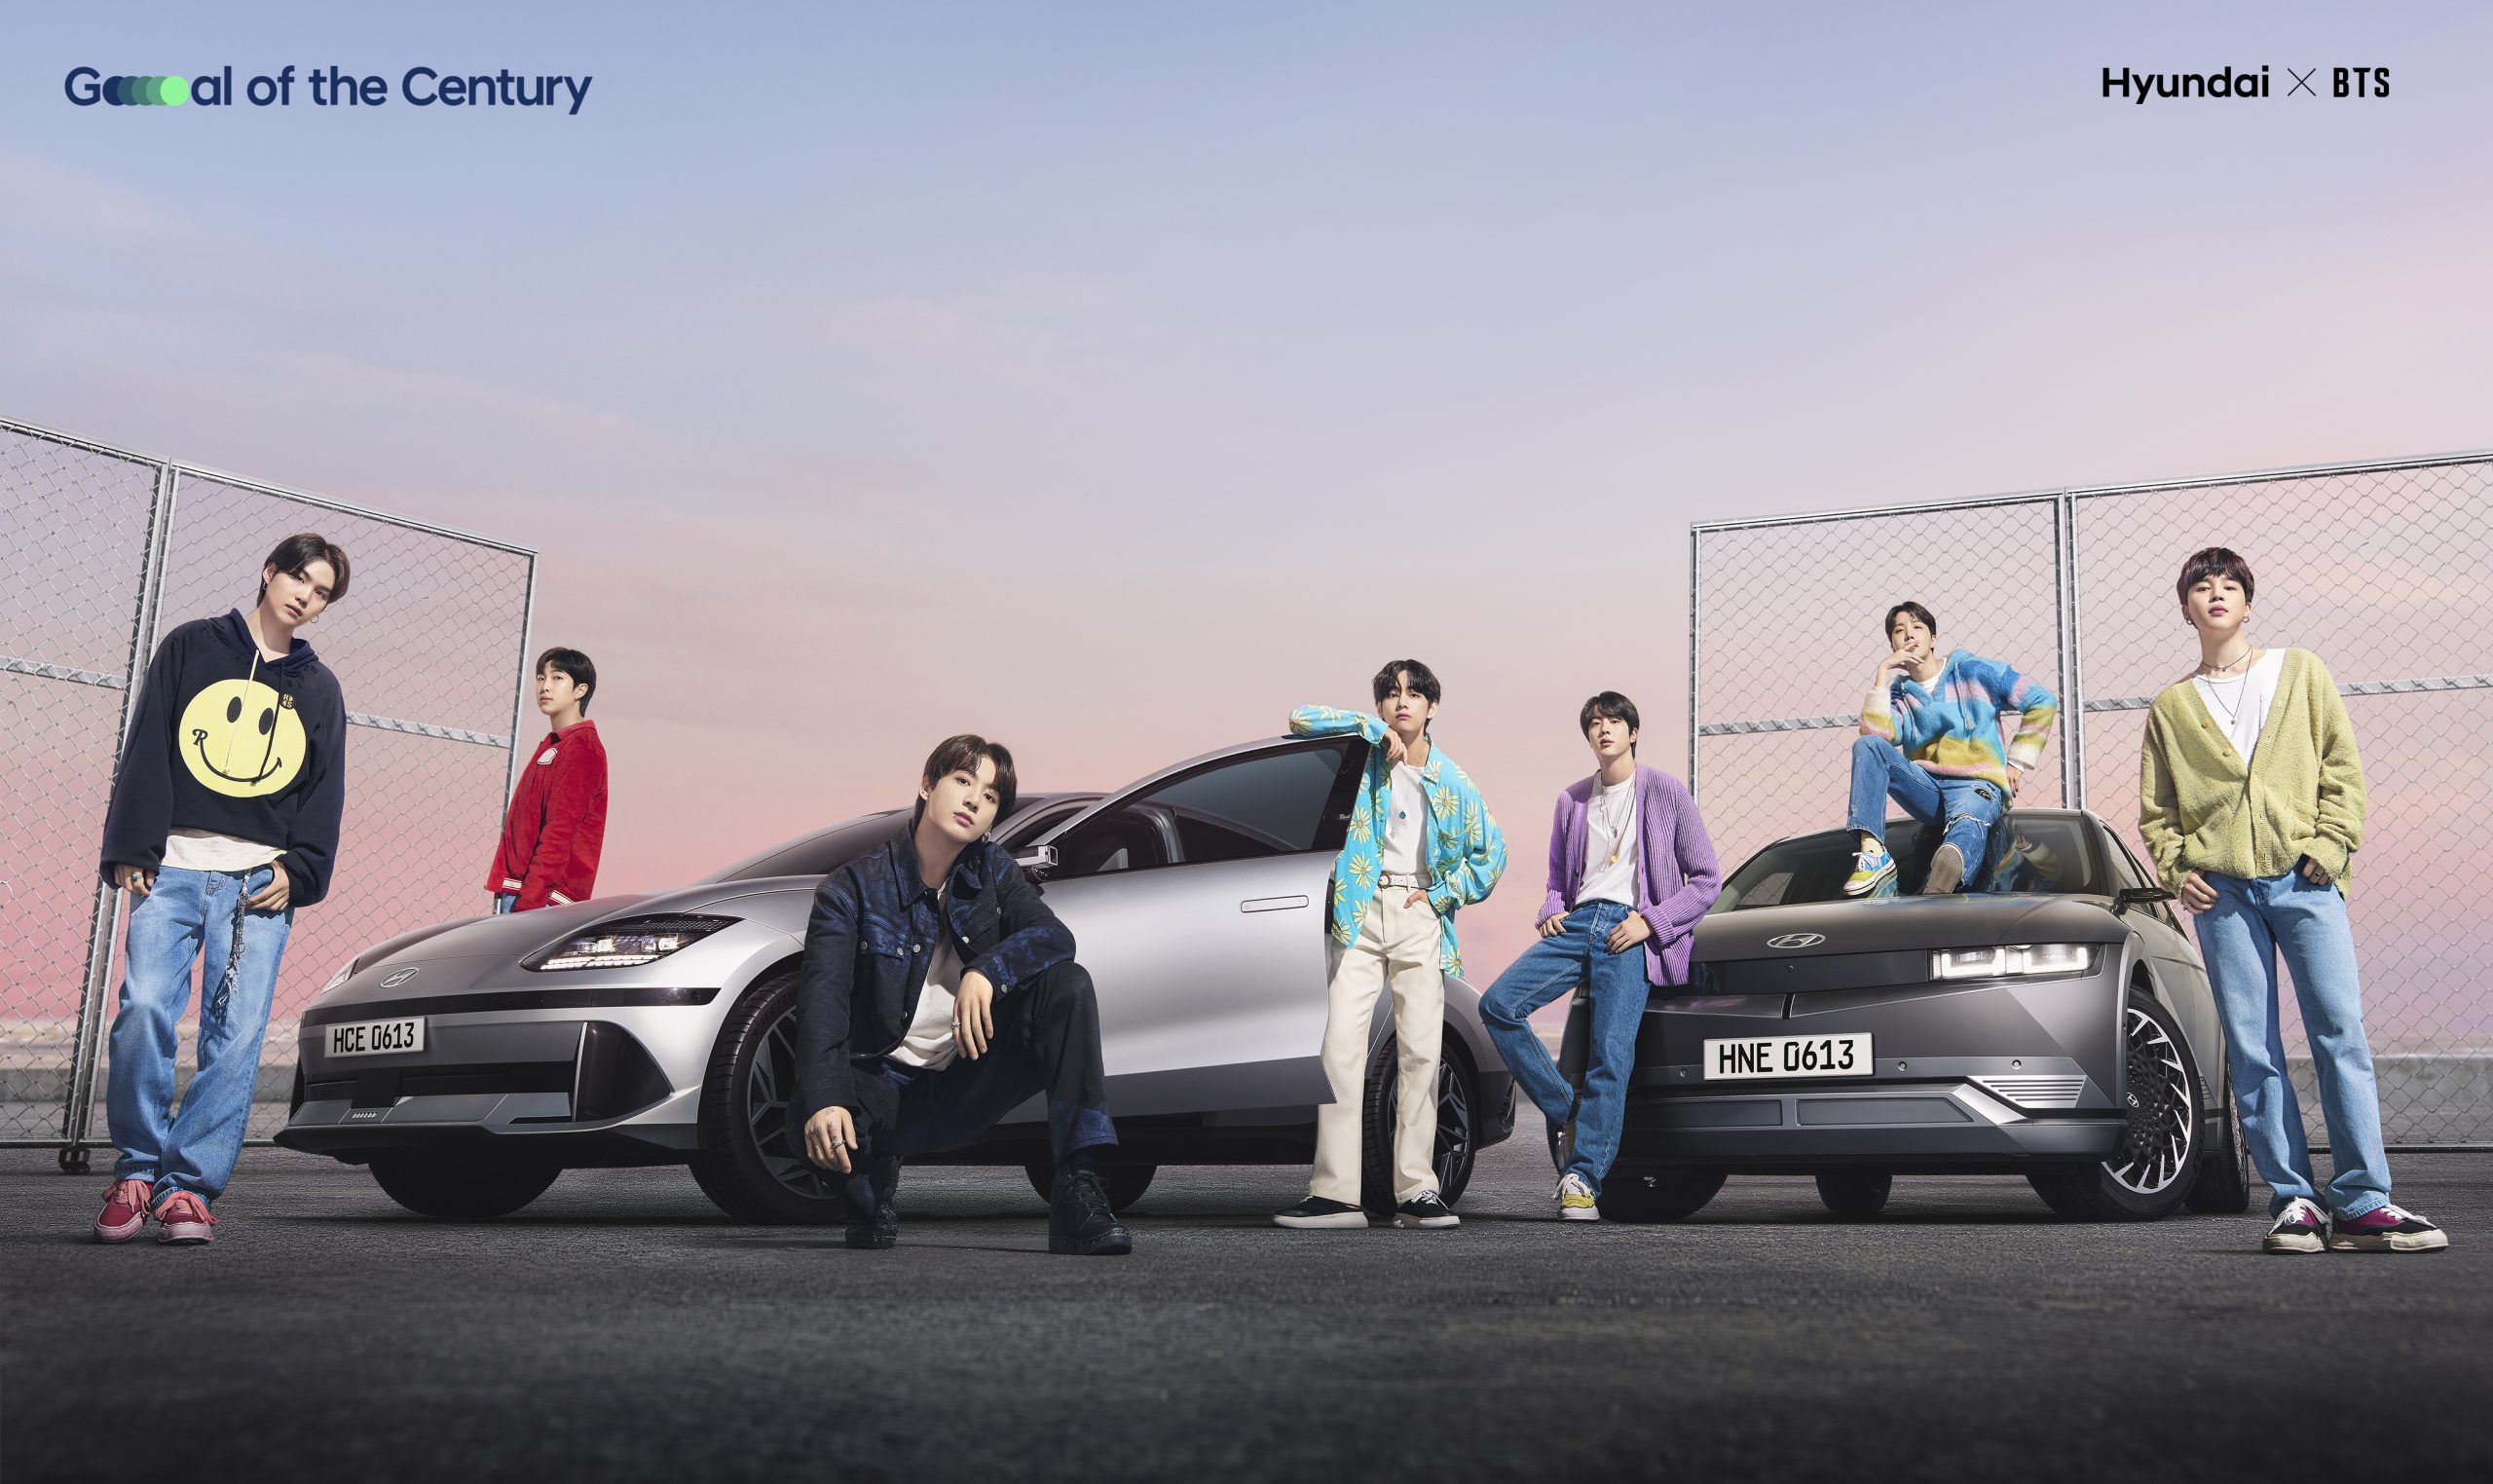 BTS’ “Yet To Come” Reborn as Hyundai Version for the Goal of the Century (2022) World Cup Campaign